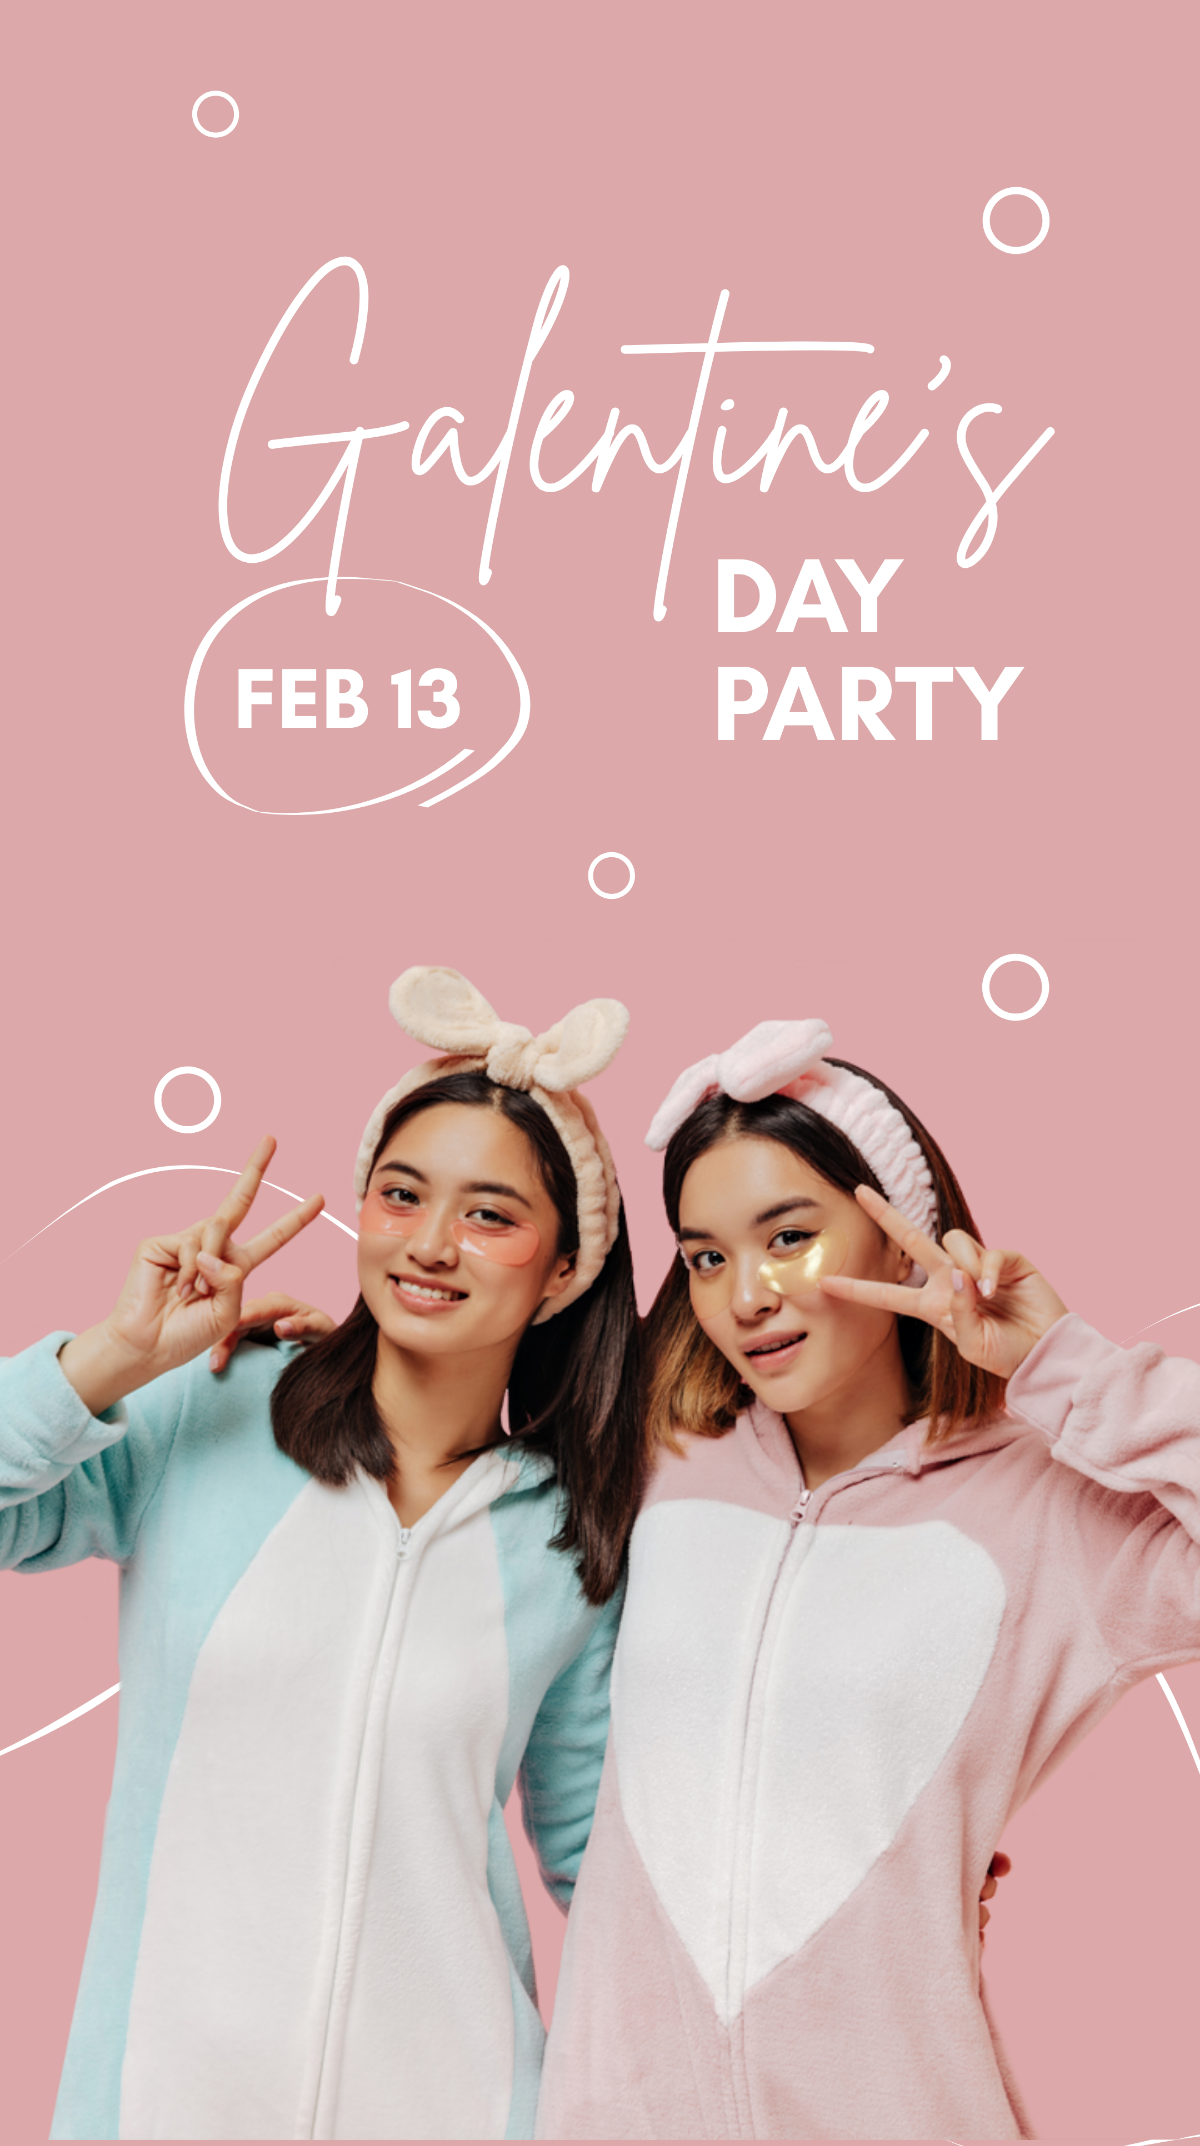 Free Galentines Day Party Instagram Story Template